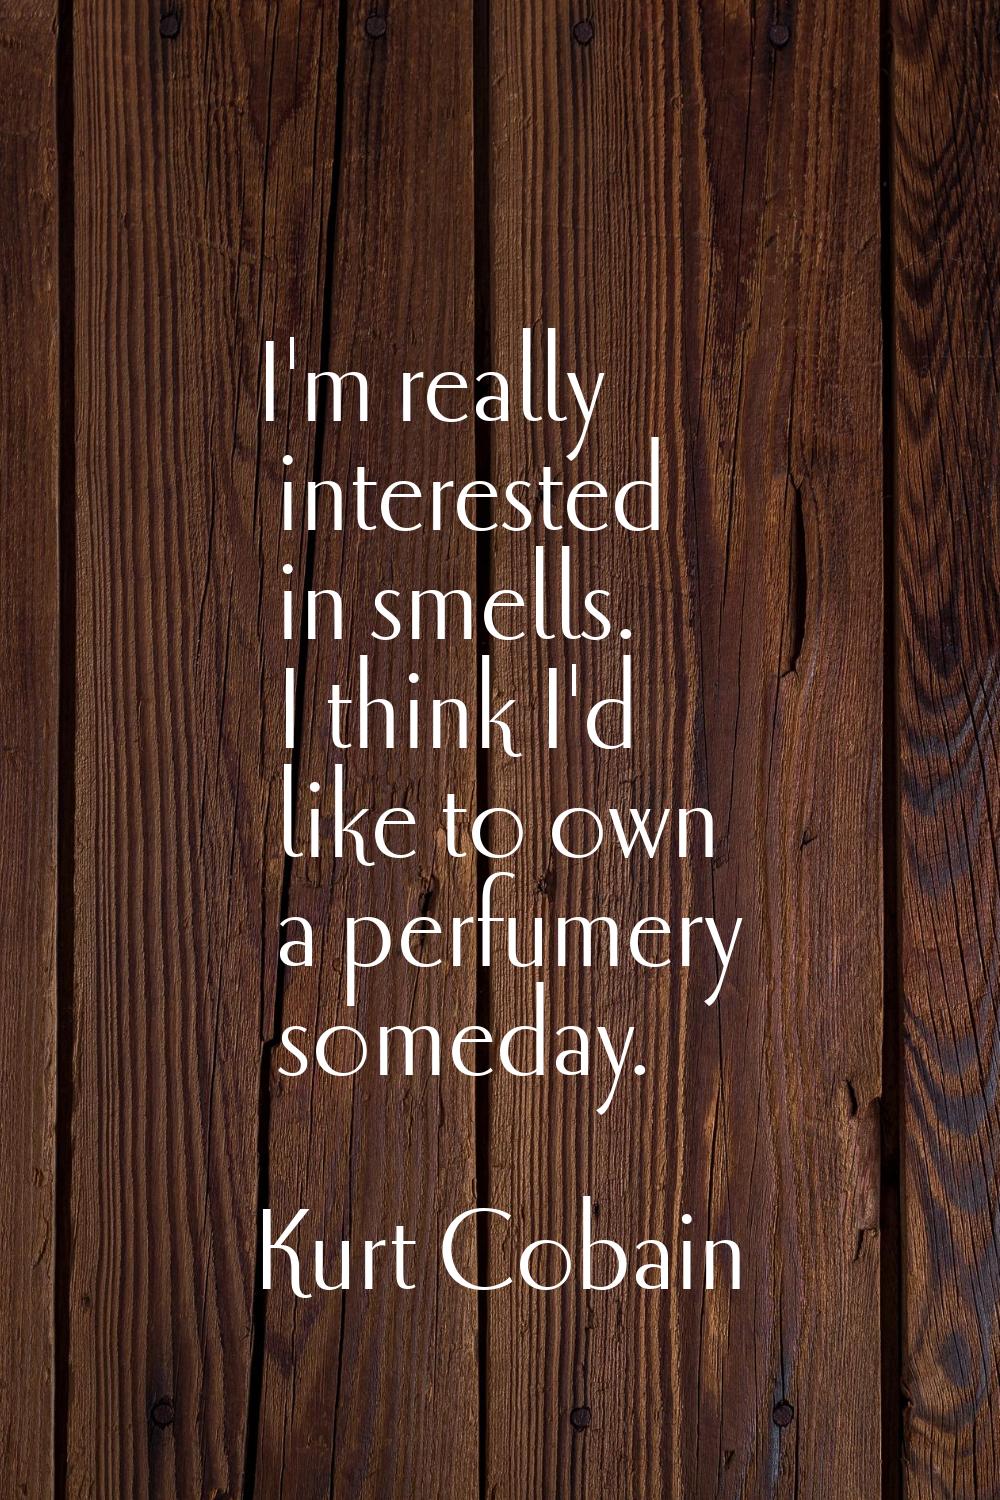 I'm really interested in smells. I think I'd like to own a perfumery someday.